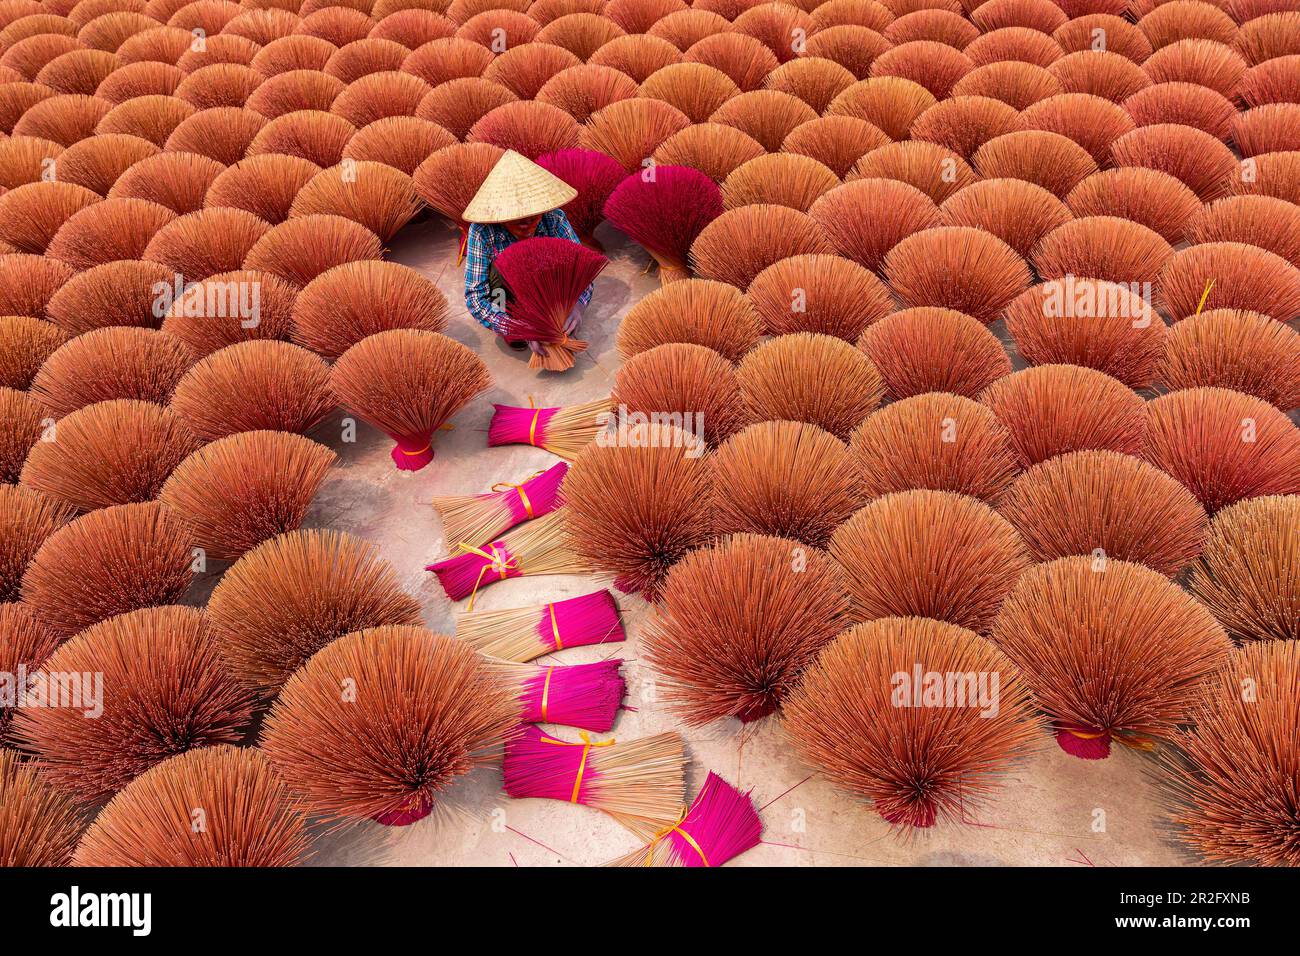 Vietnamese woman making incense sticks for the Tet festivities, the New Year celebrations, Vietnam, Asia Stock Photo